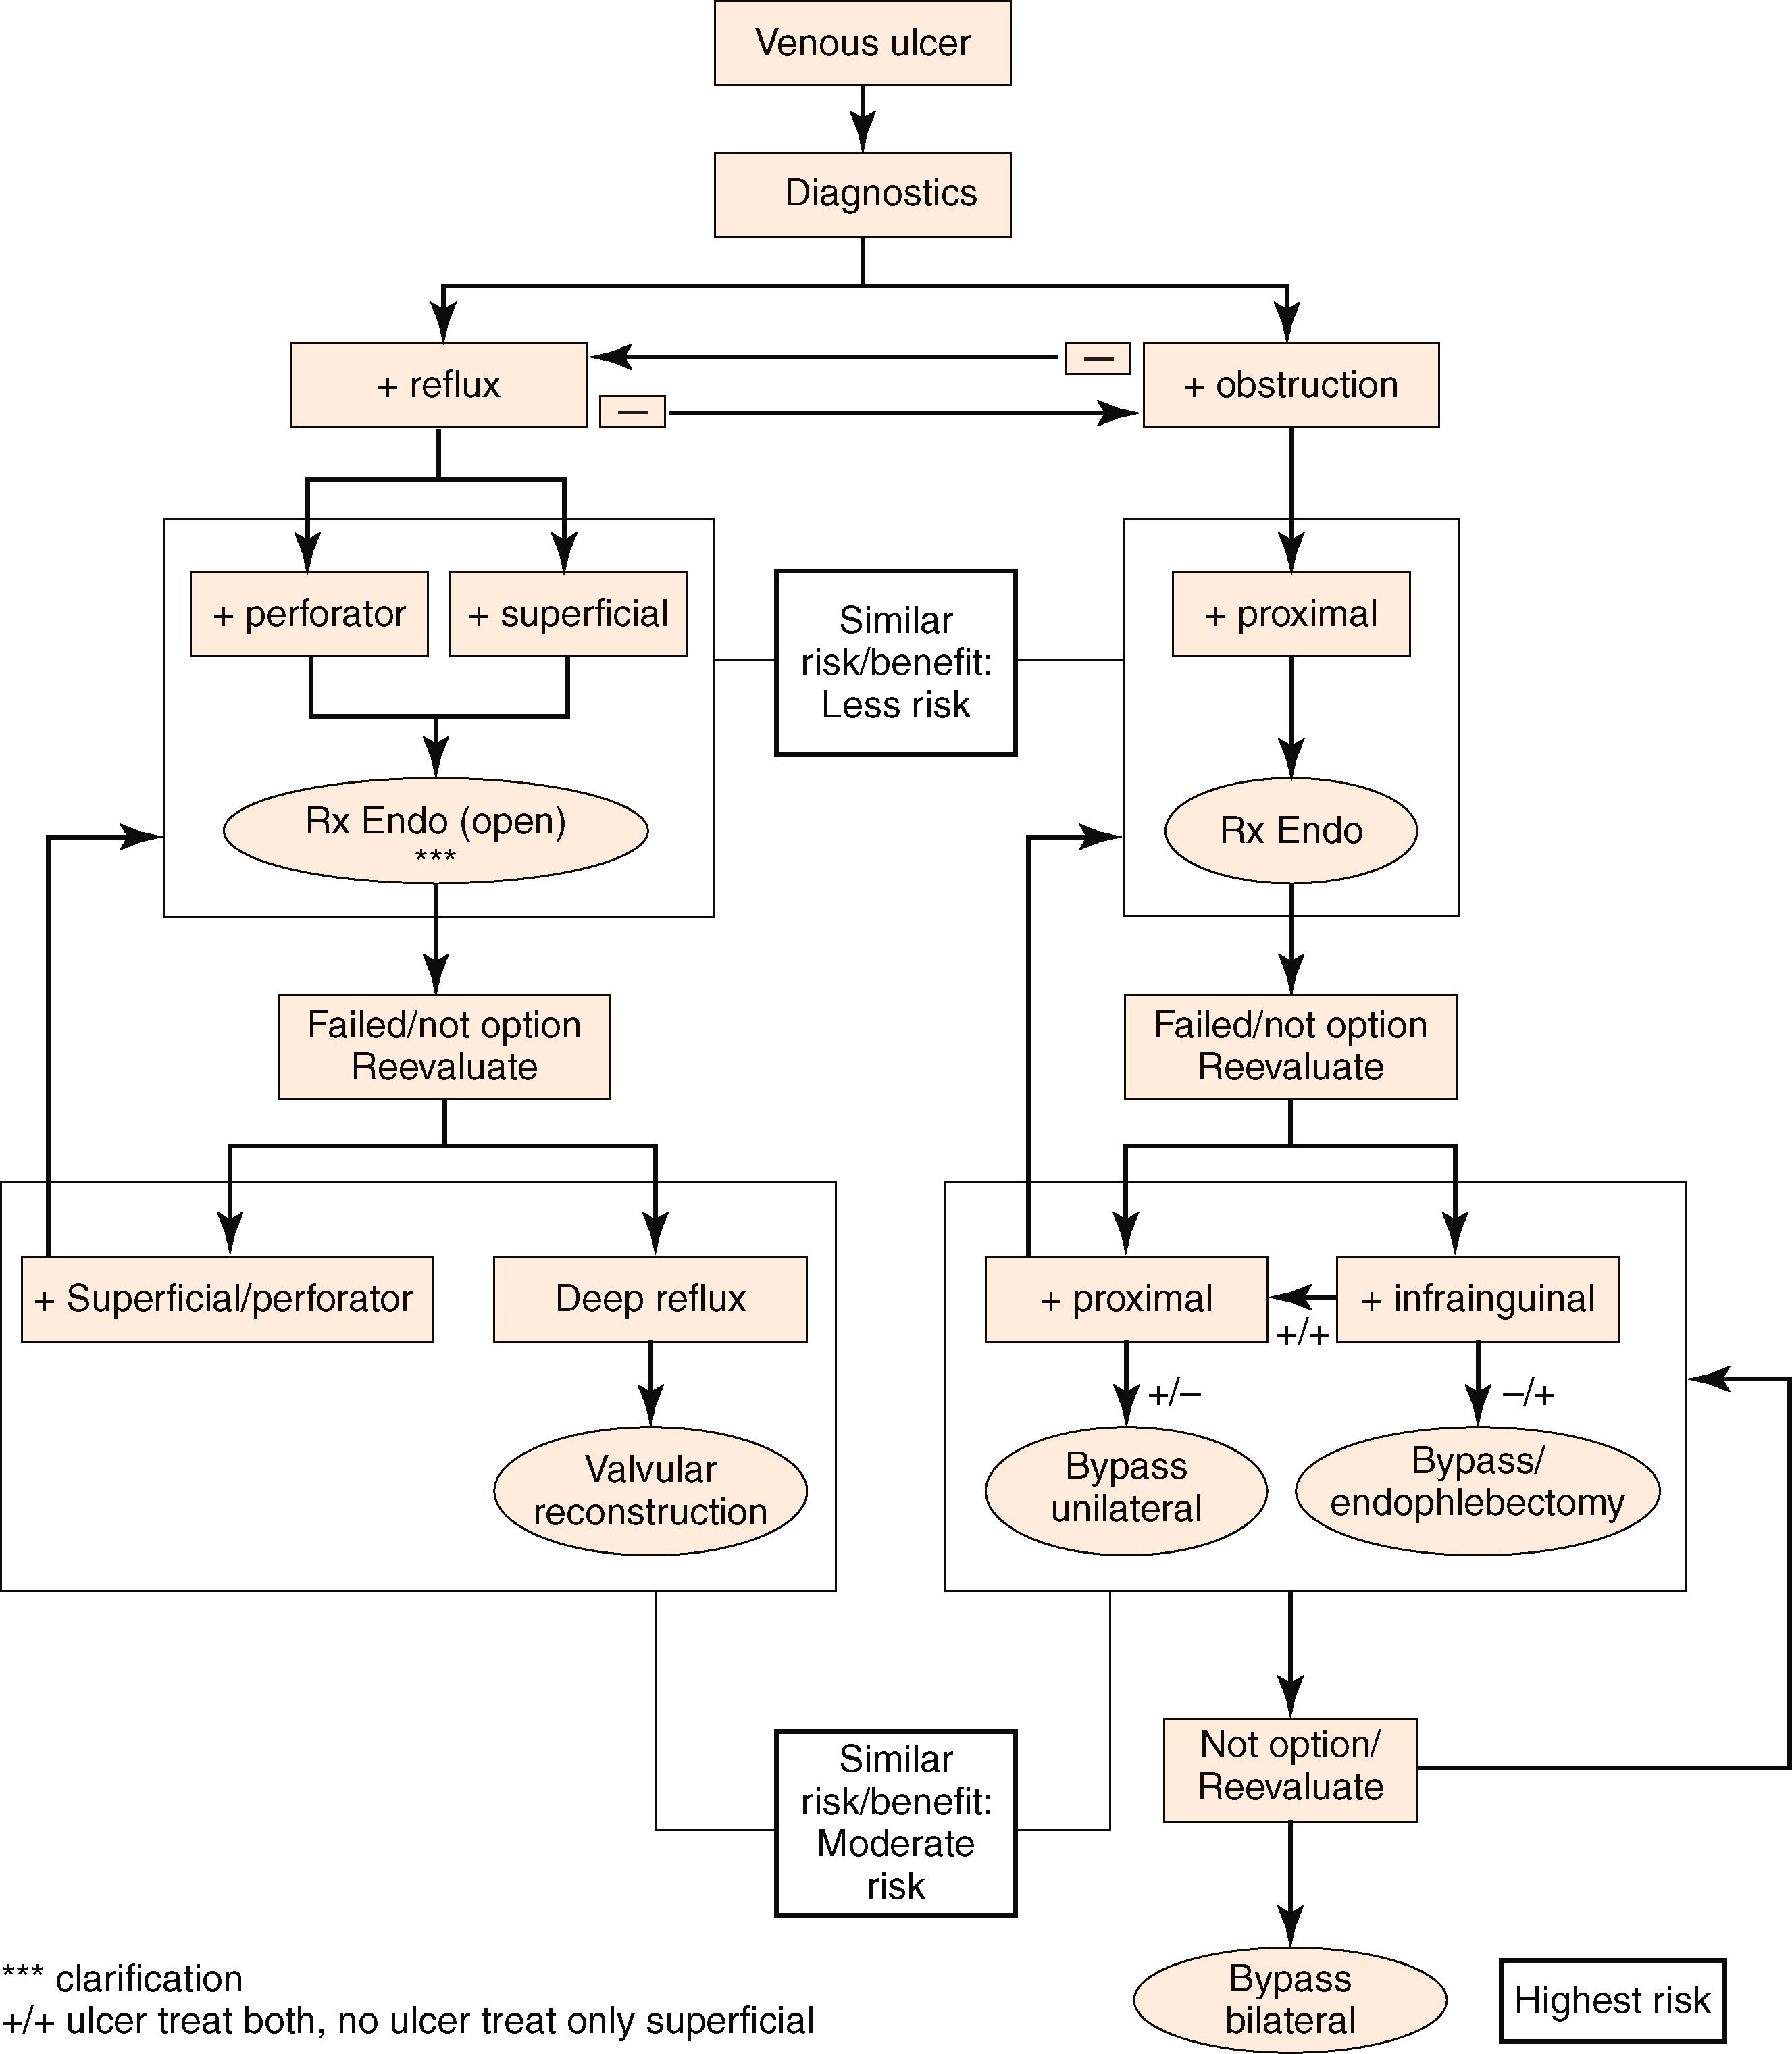 Figure 159.4, Proposed algorithm for operative and endovascular treatment of patients with venous leg ulcer based on involved anatomic venous system and presence of venous reflux or obstruction. The risk-to-benefit ratio is weighed for those procedures with more risk (lower, moderate, higher) considered later in the treatment when the benefit is similar.